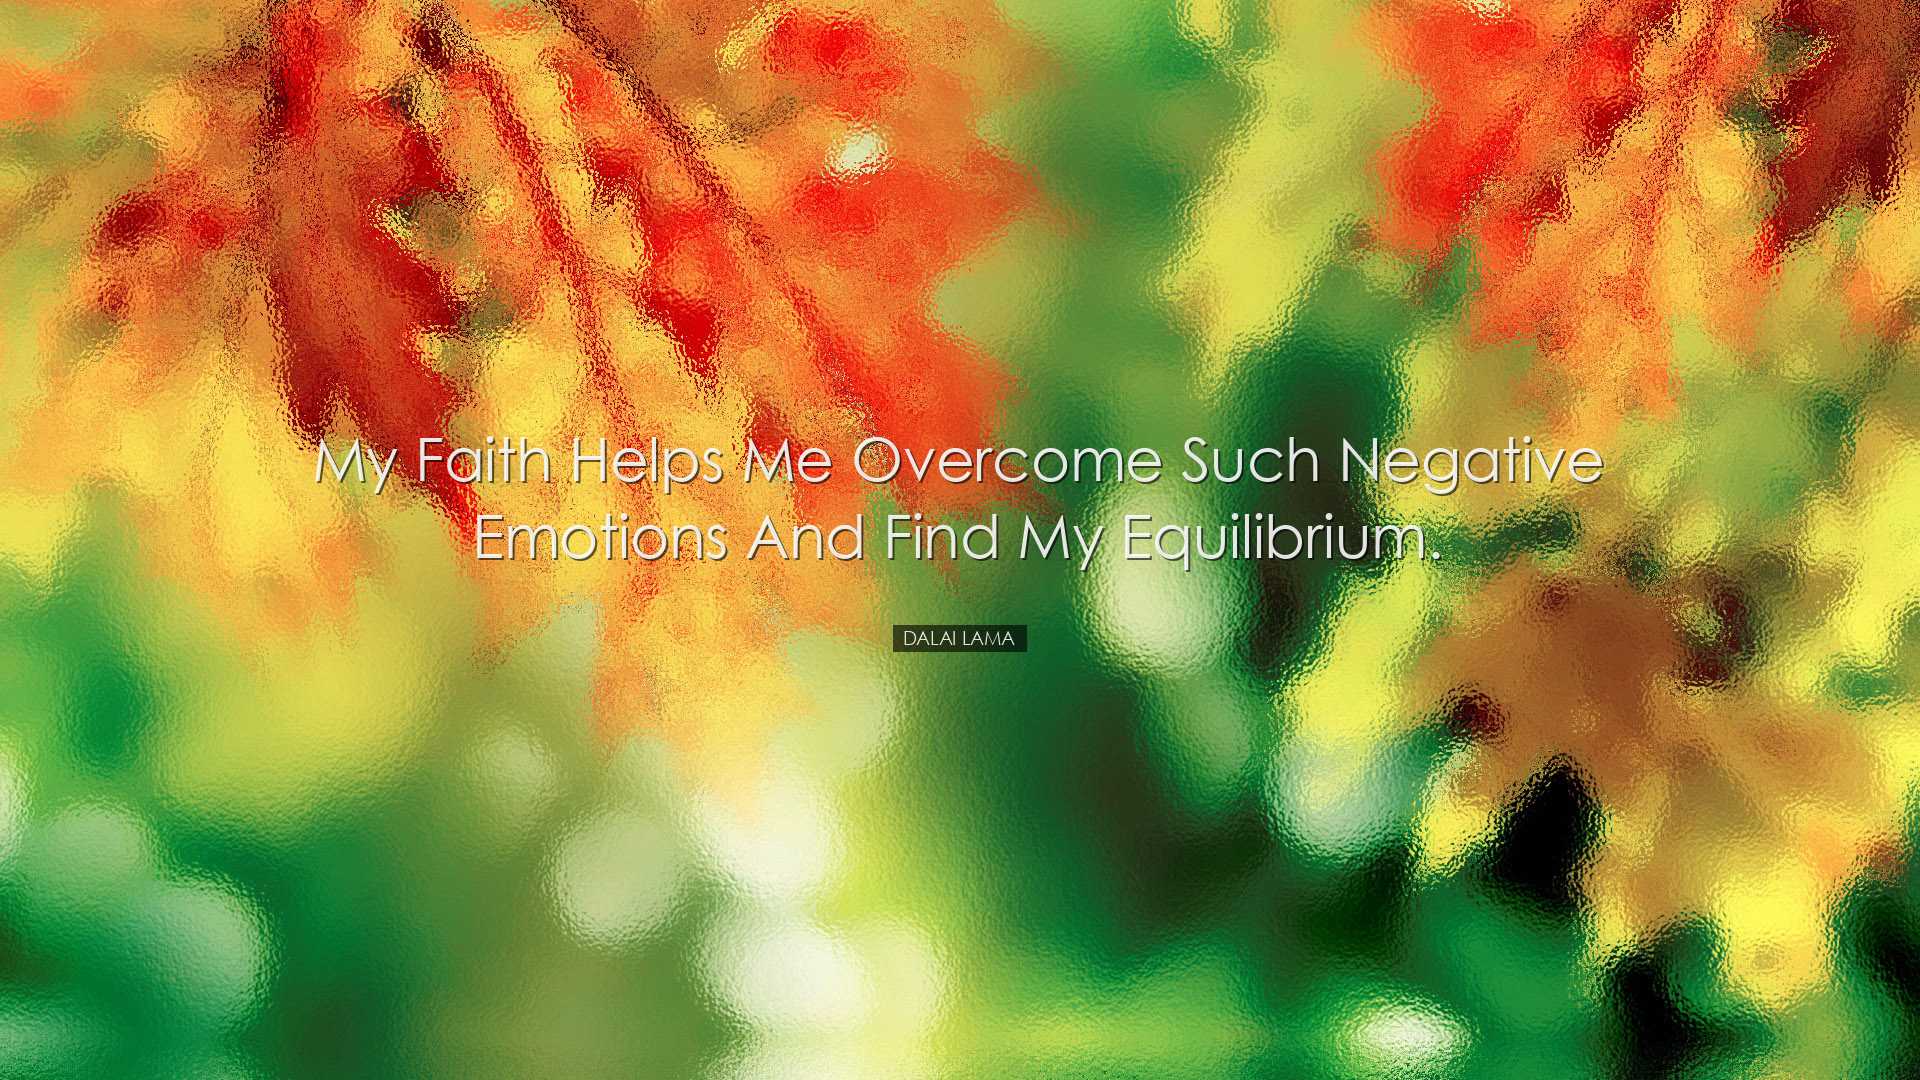 My faith helps me overcome such negative emotions and find my equi